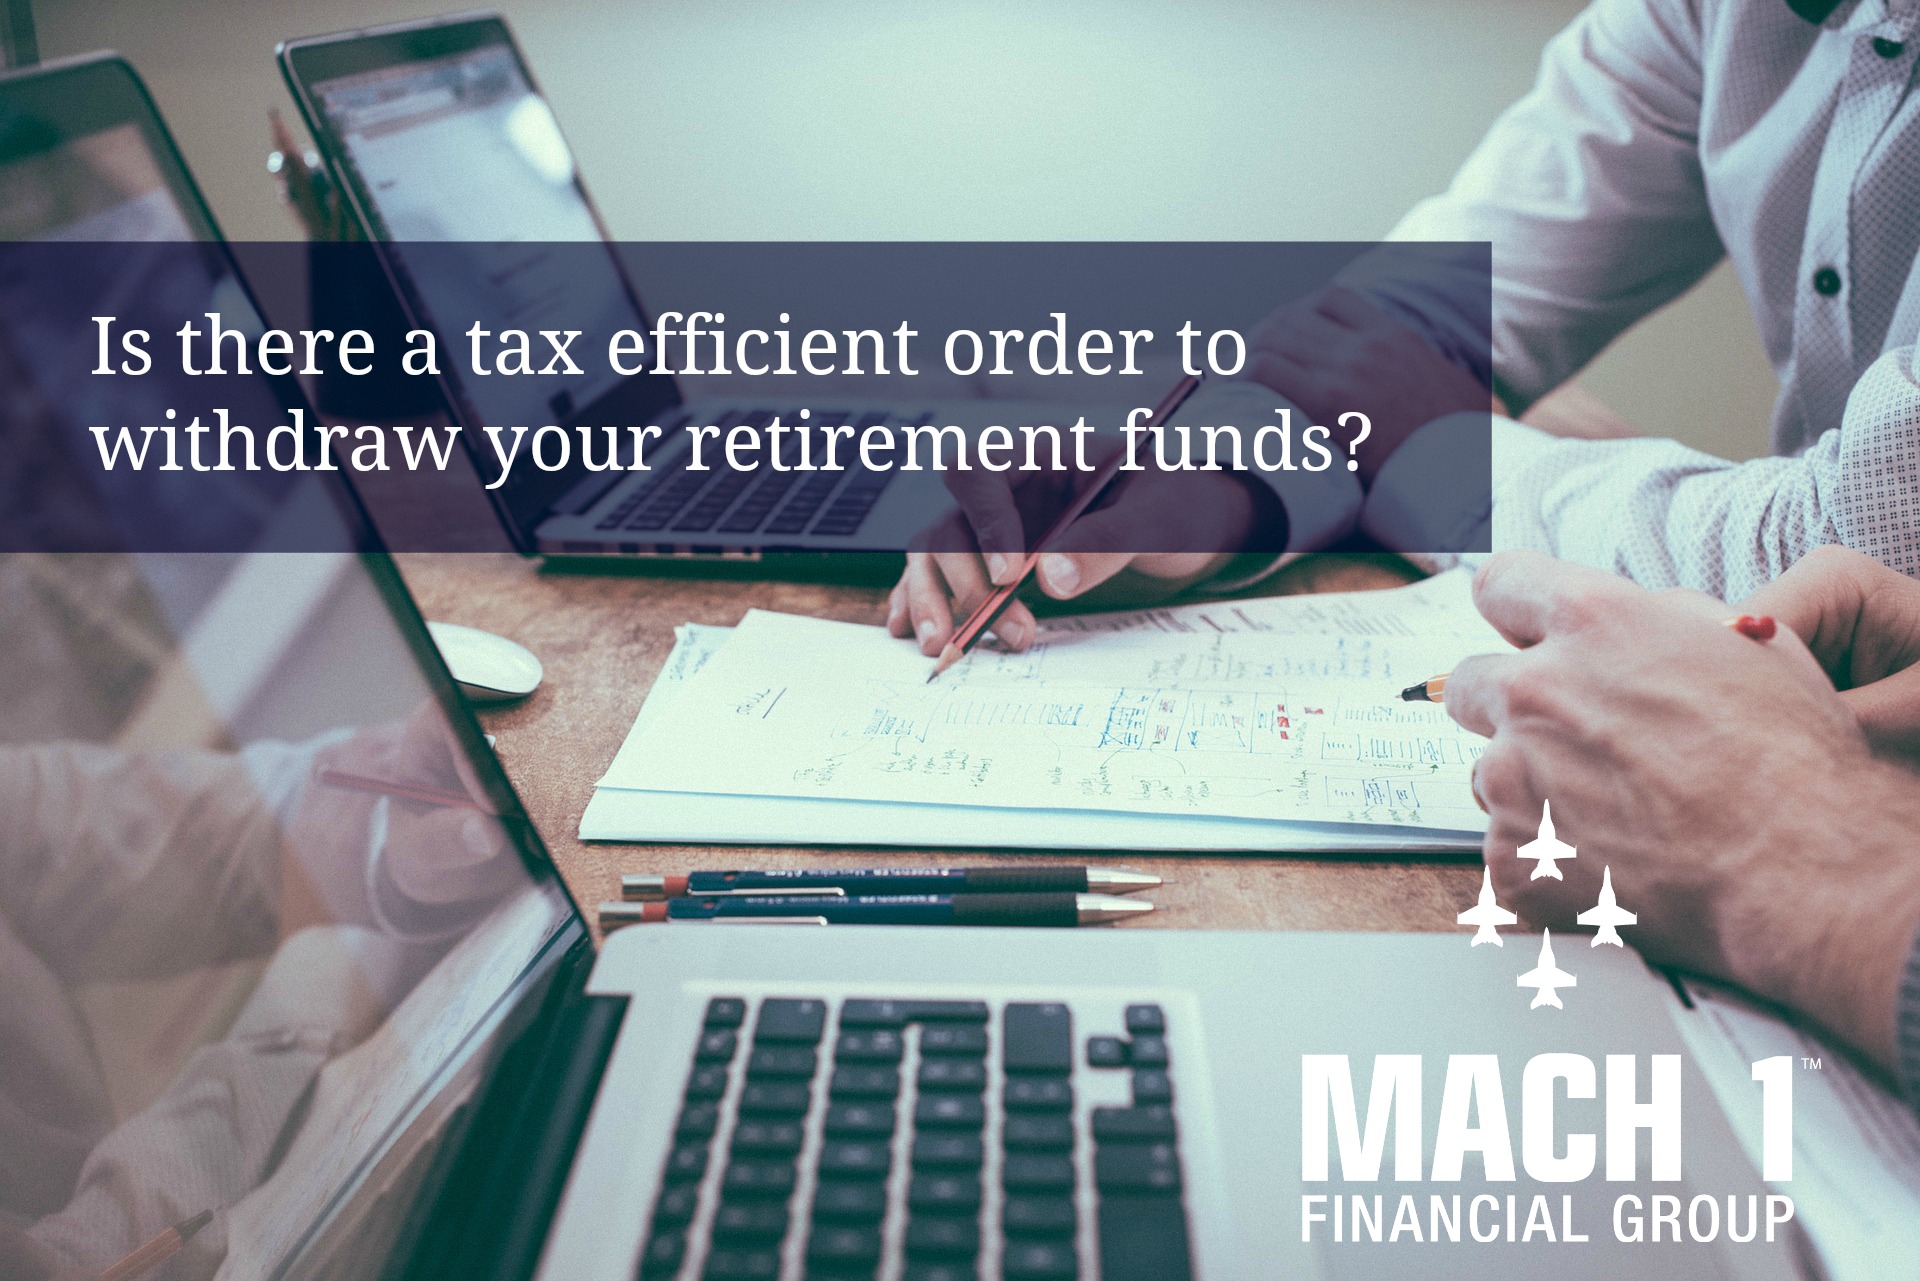 Is there a tax efficient order to withdraw your retirement funds?